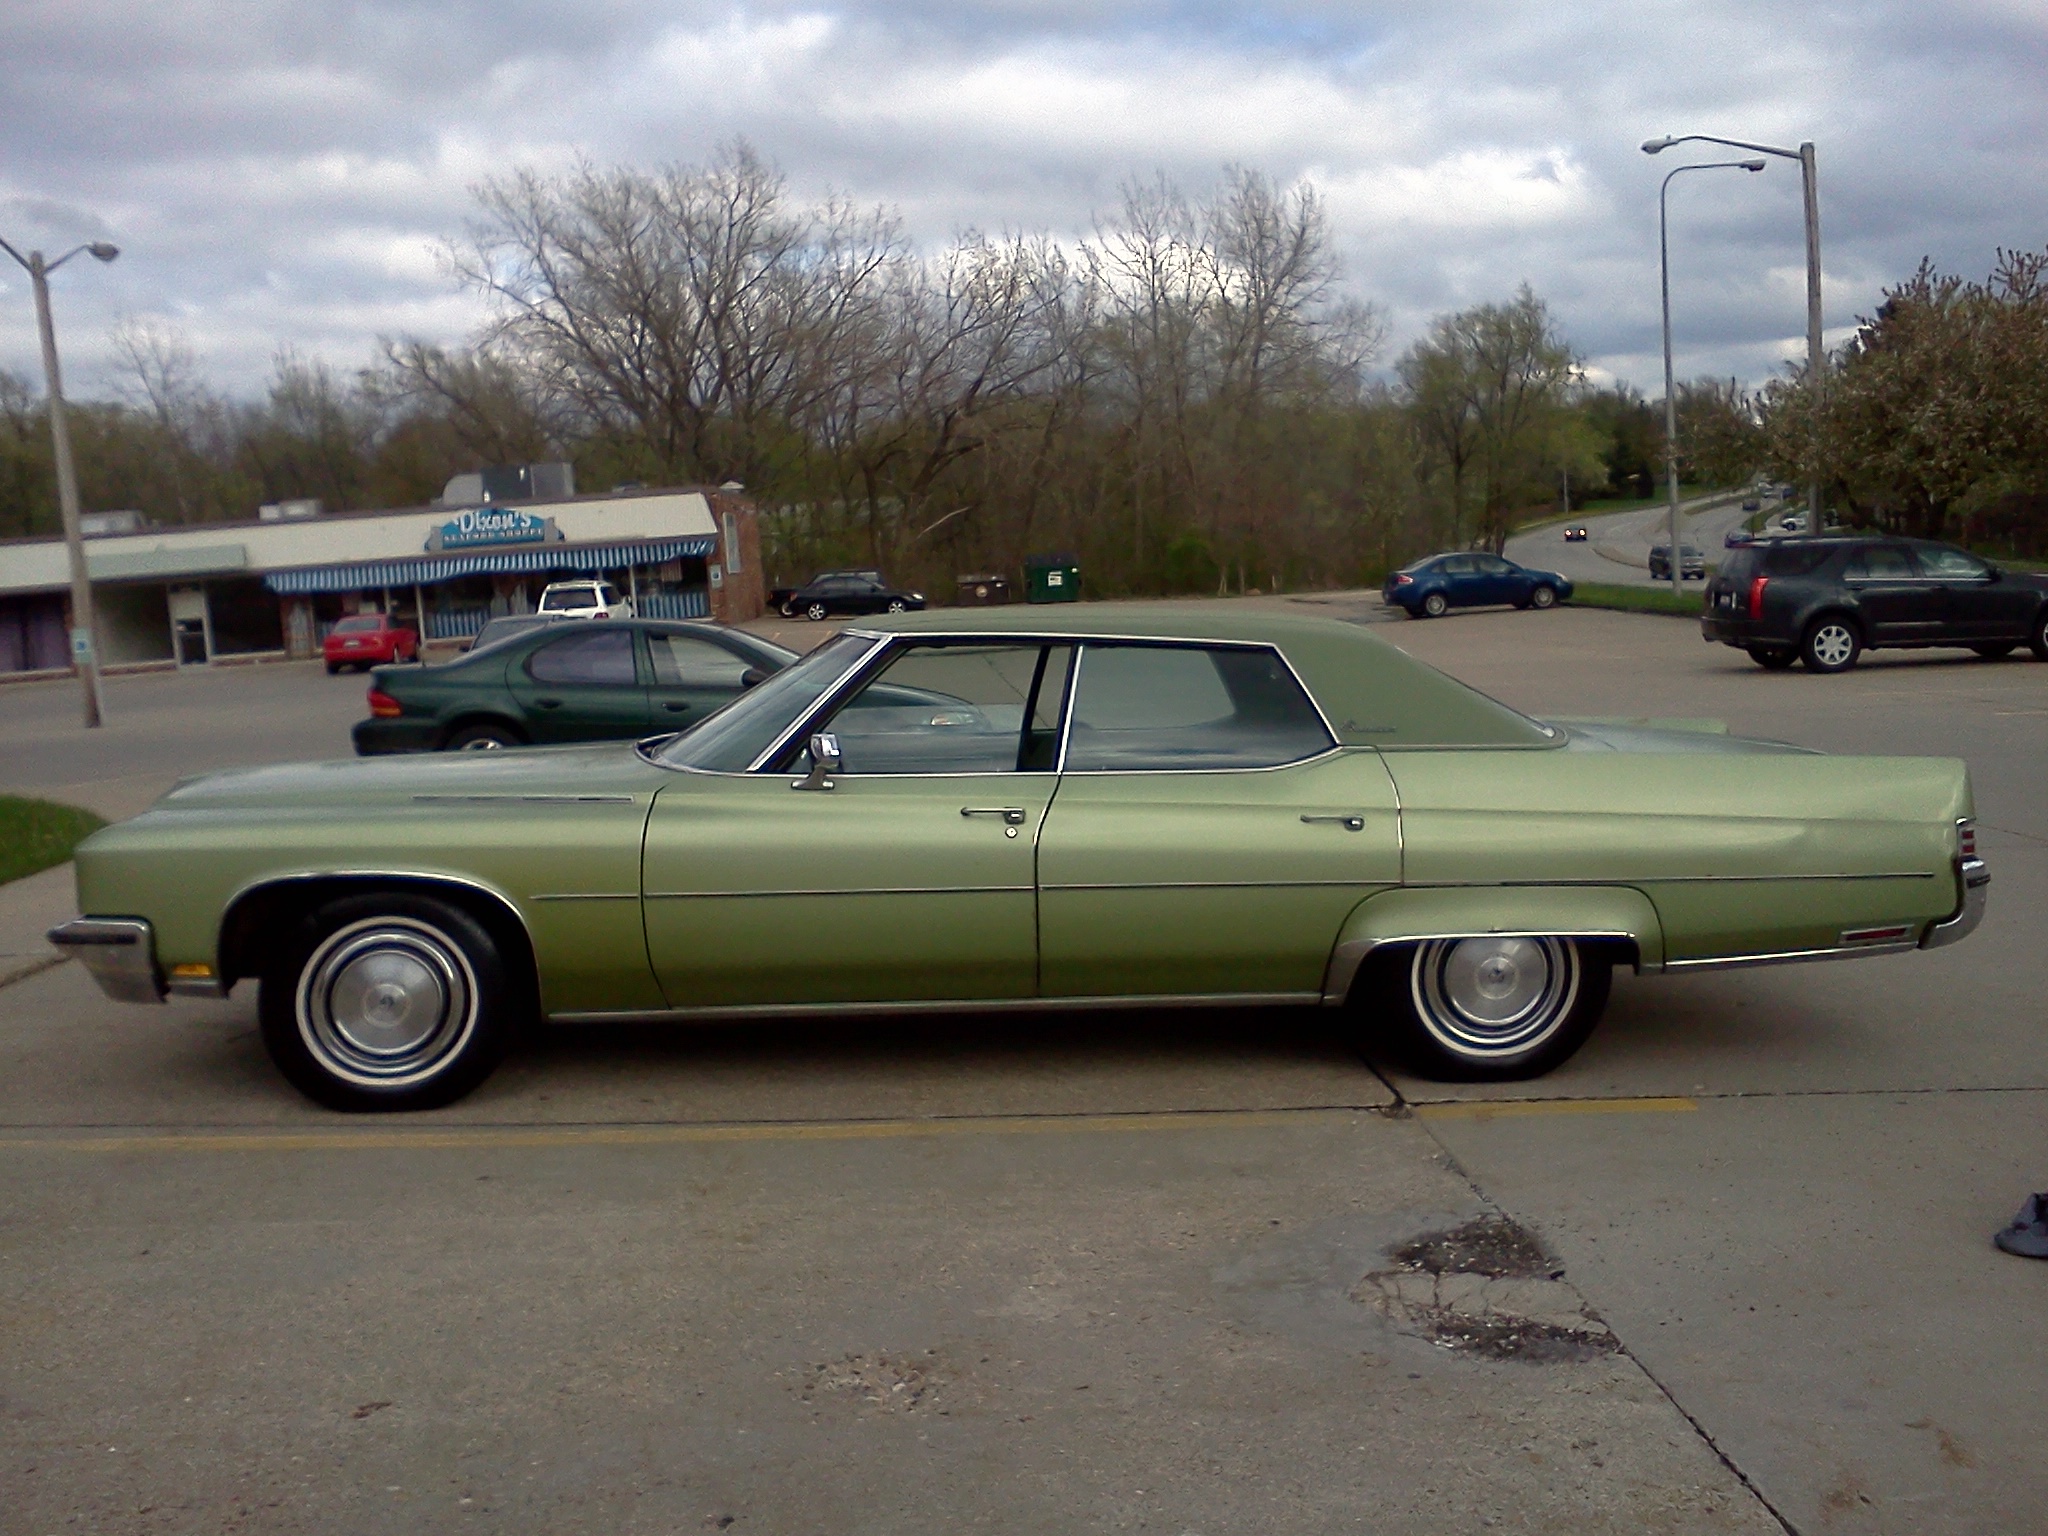 Buick 1972. Buick Electra 1972. Buick Electra 225 1972. Buick Electra 1971. Buick Electra 1.